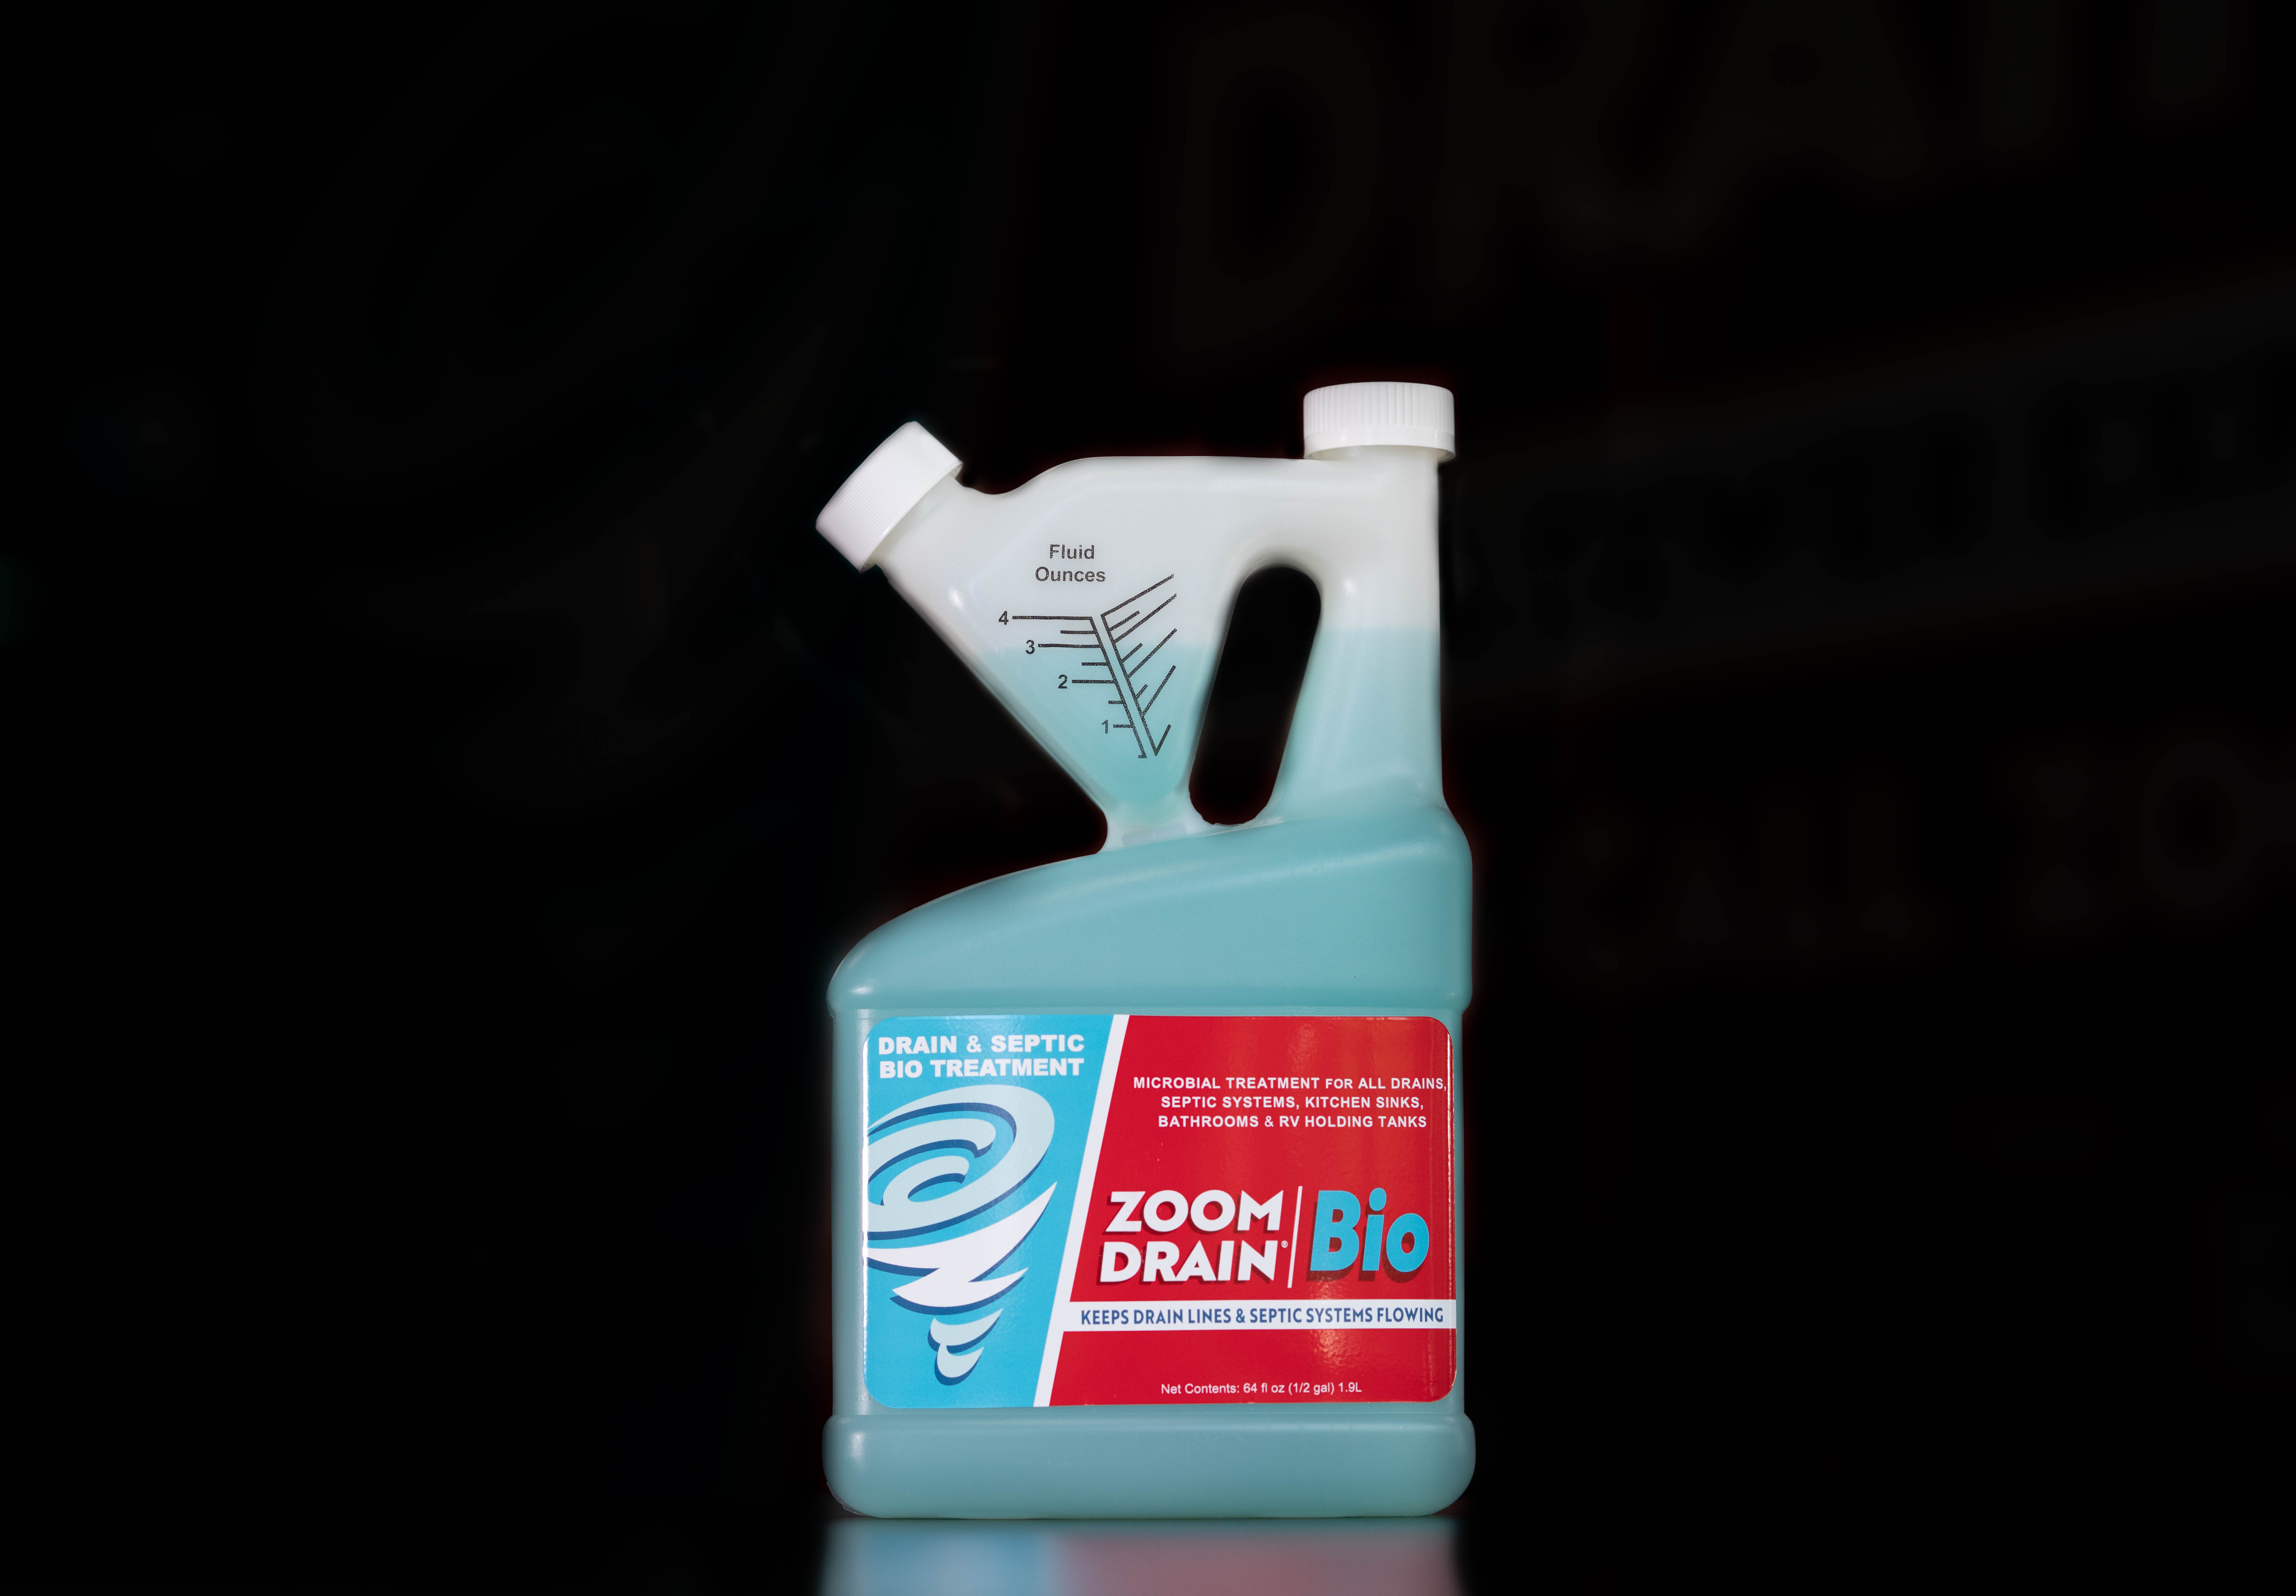 Are Bio Drain Cleaners Safe To Pour Down Your Pipes?